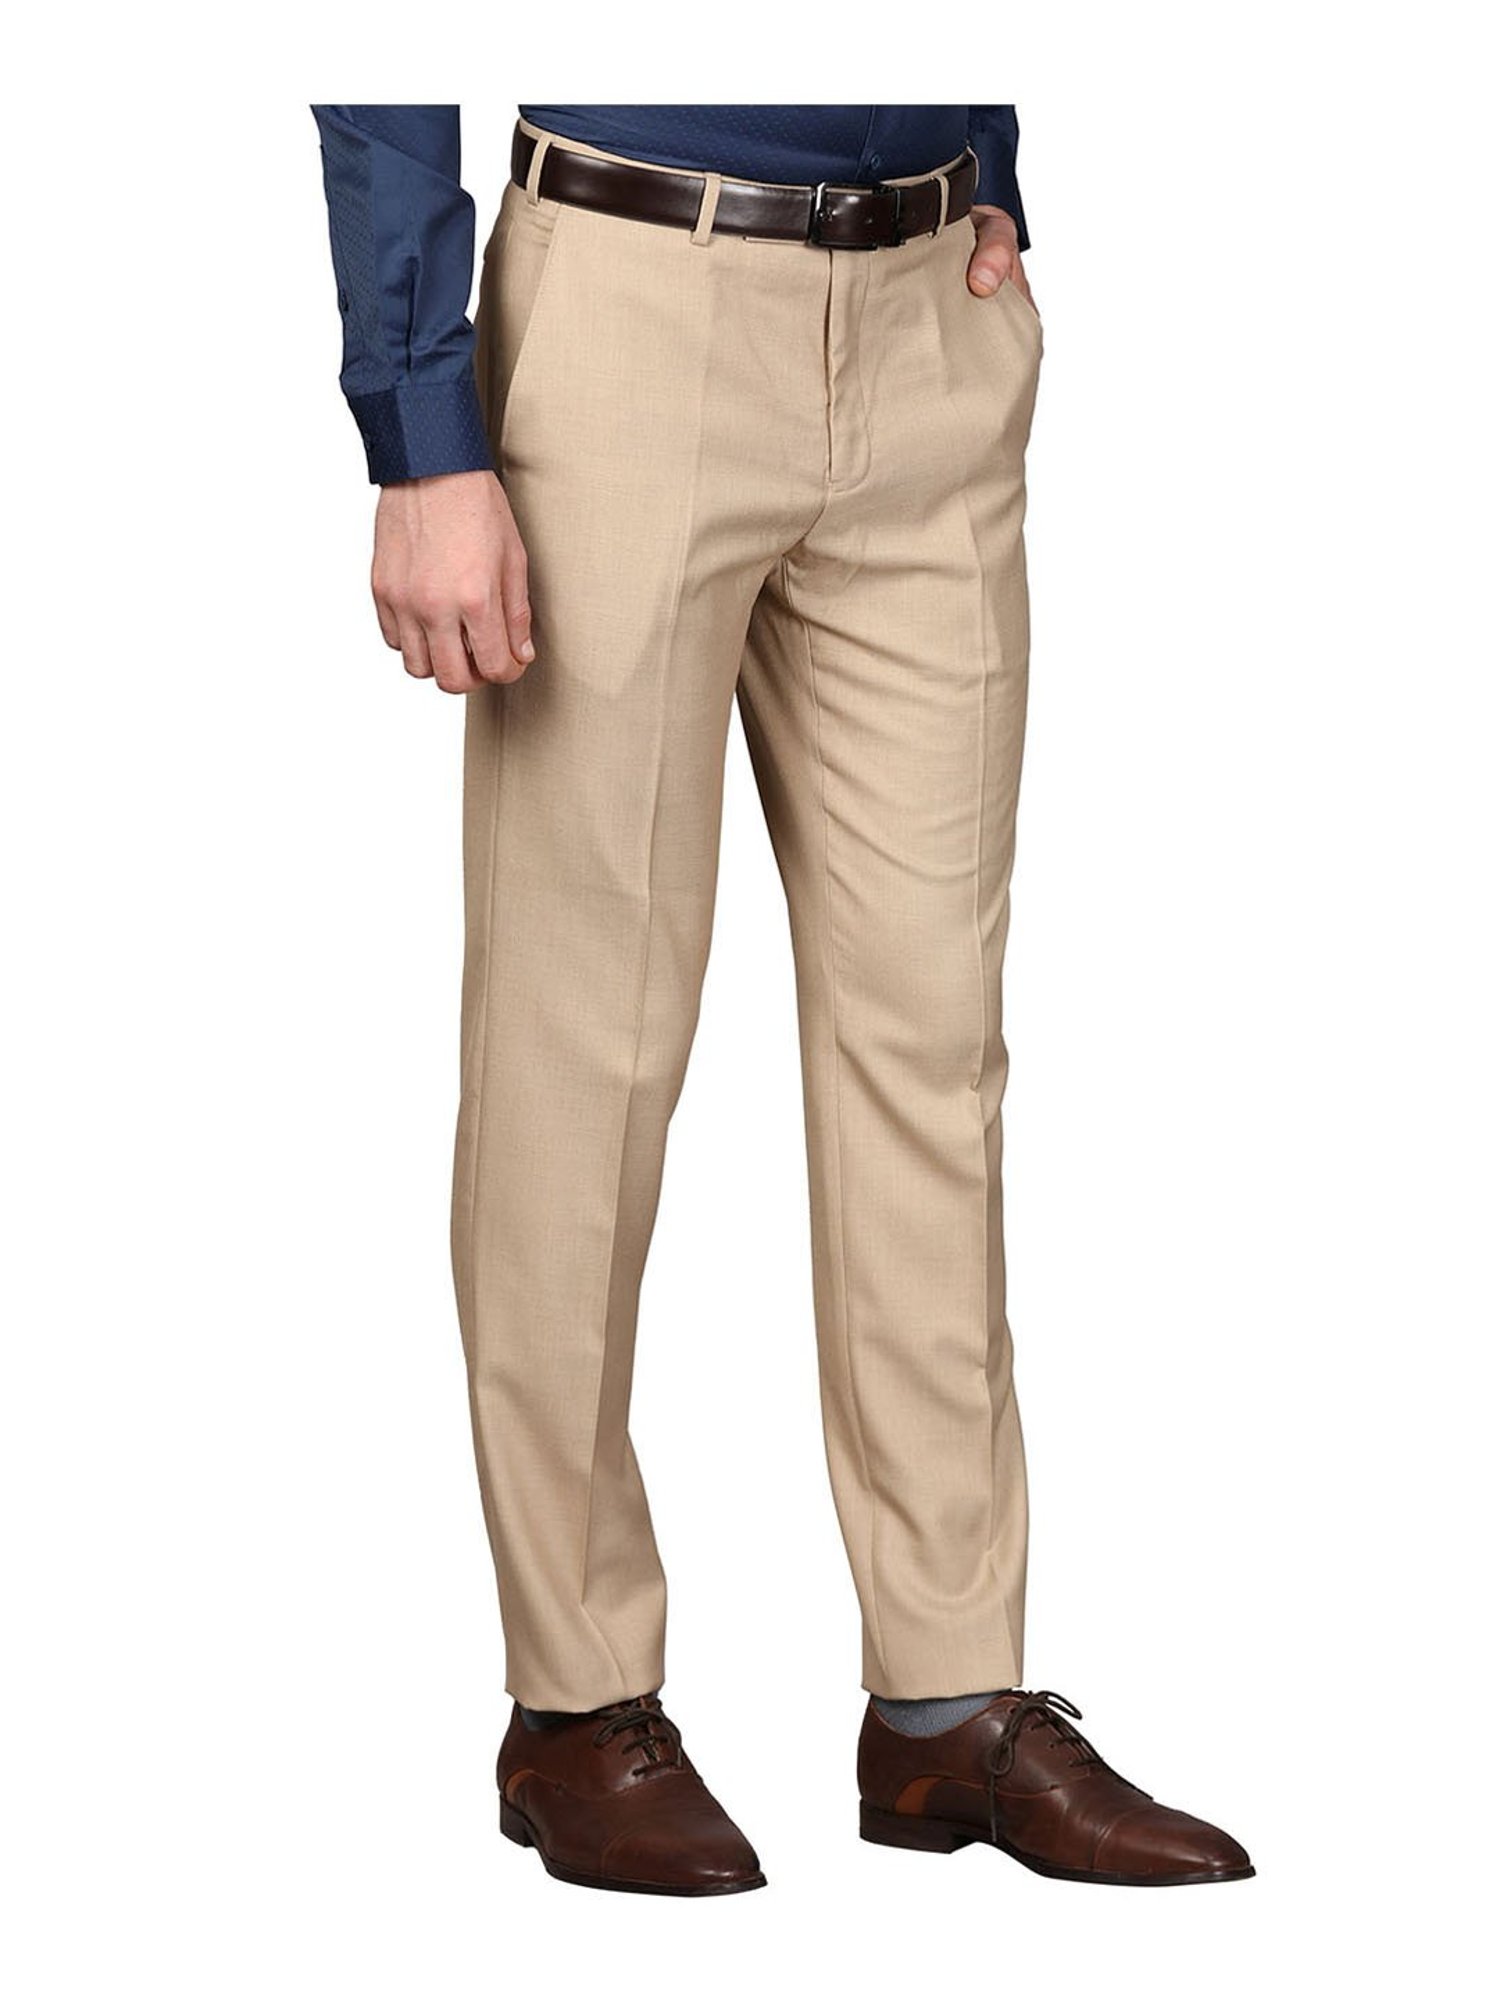 Next Look Formal Trousers  Buy Next Look Men Checks Grey Trouser Online   Nykaa Fashion